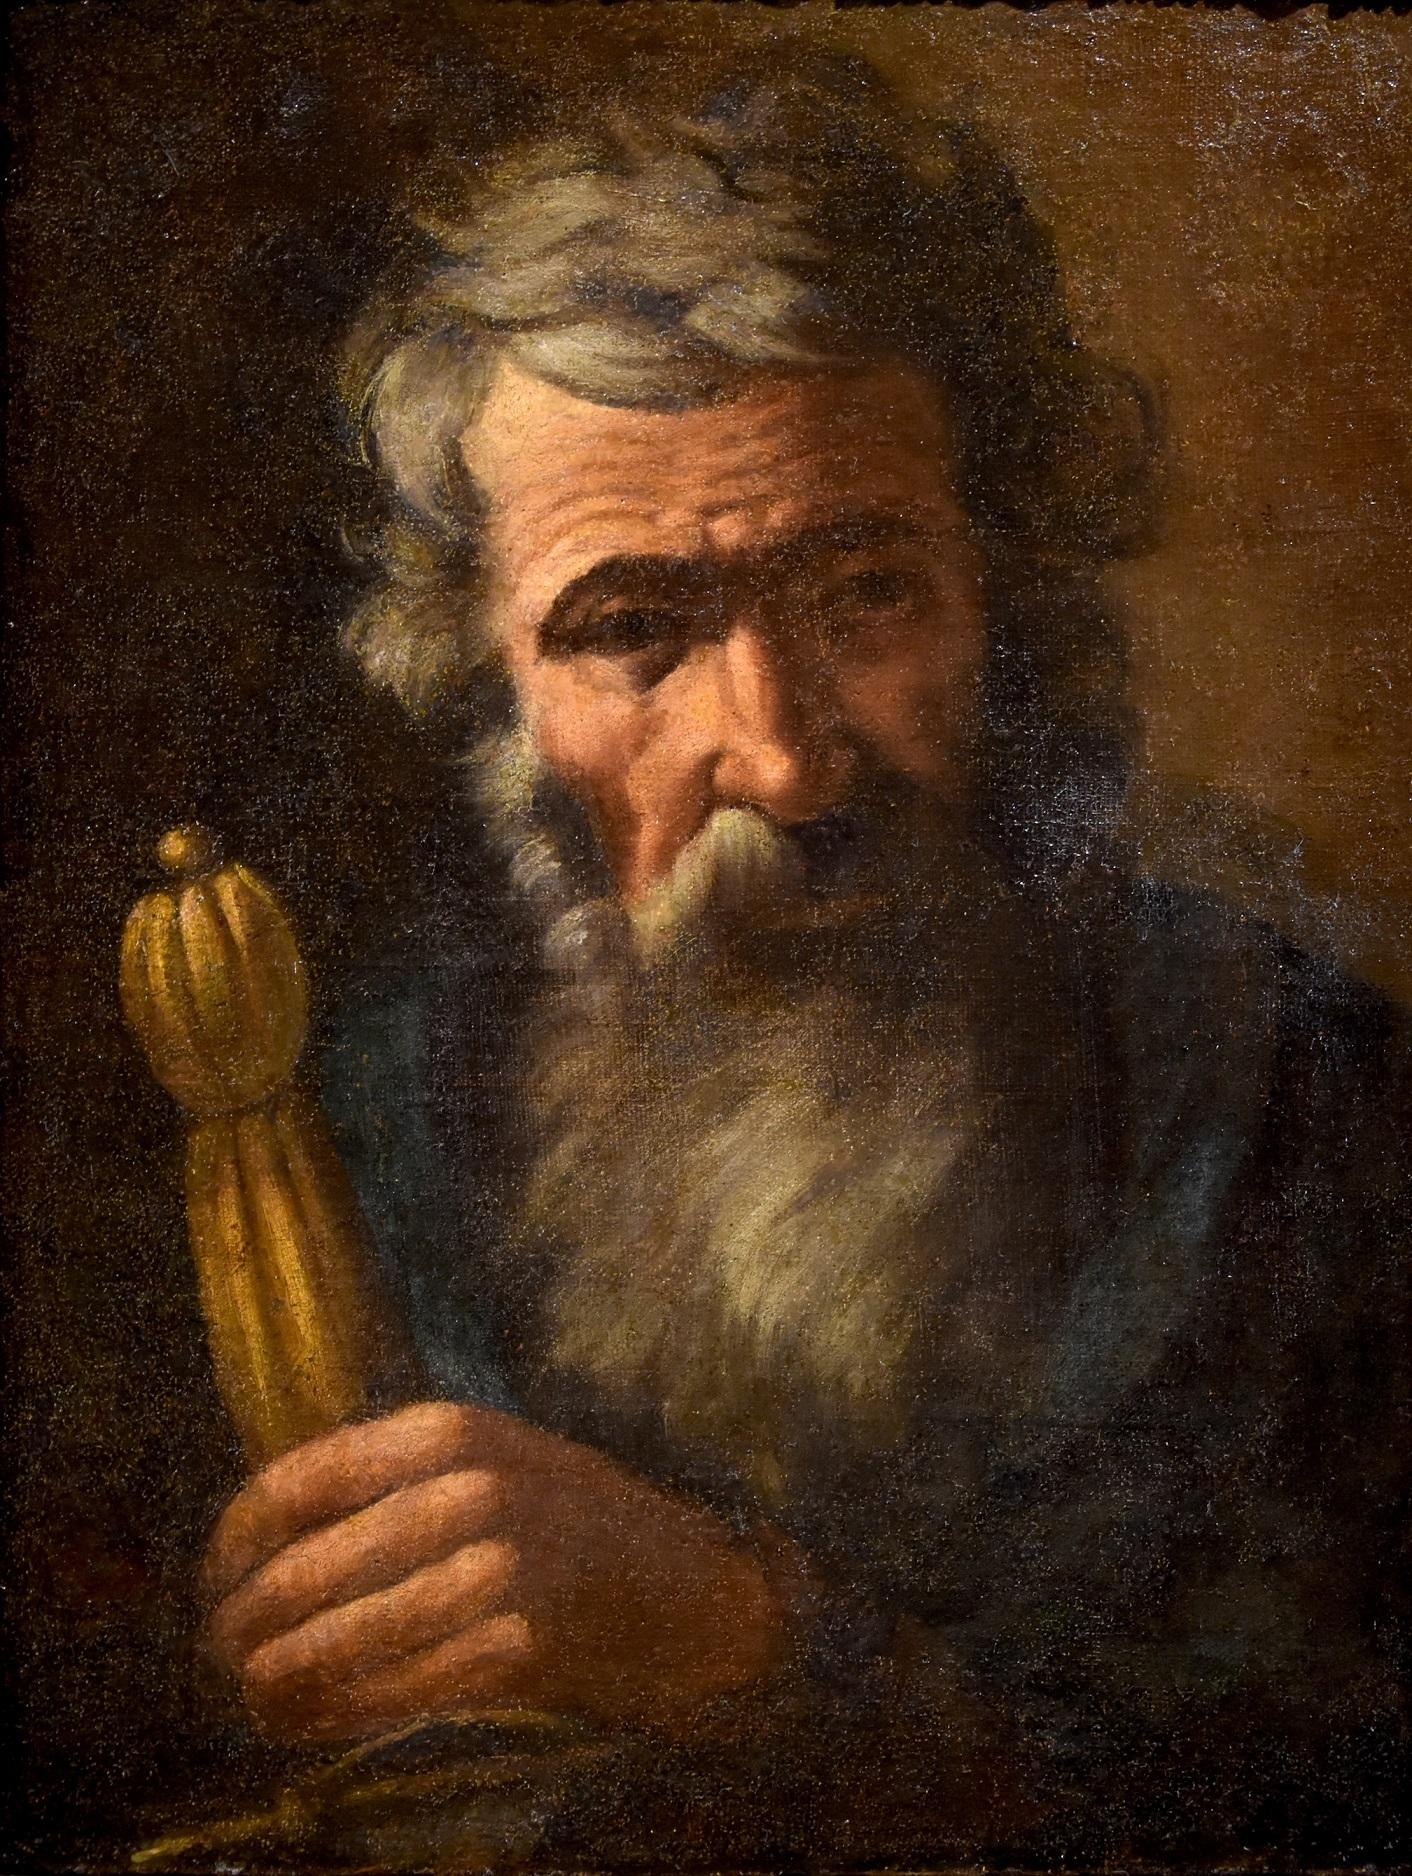 Saint Paul Apostle Fracanzano Paint Oil on canvas Old master 17th Century Italy  - Old Masters Painting by Francesco Fracanzano (Monopoli, 1612 - Naples, 1656)